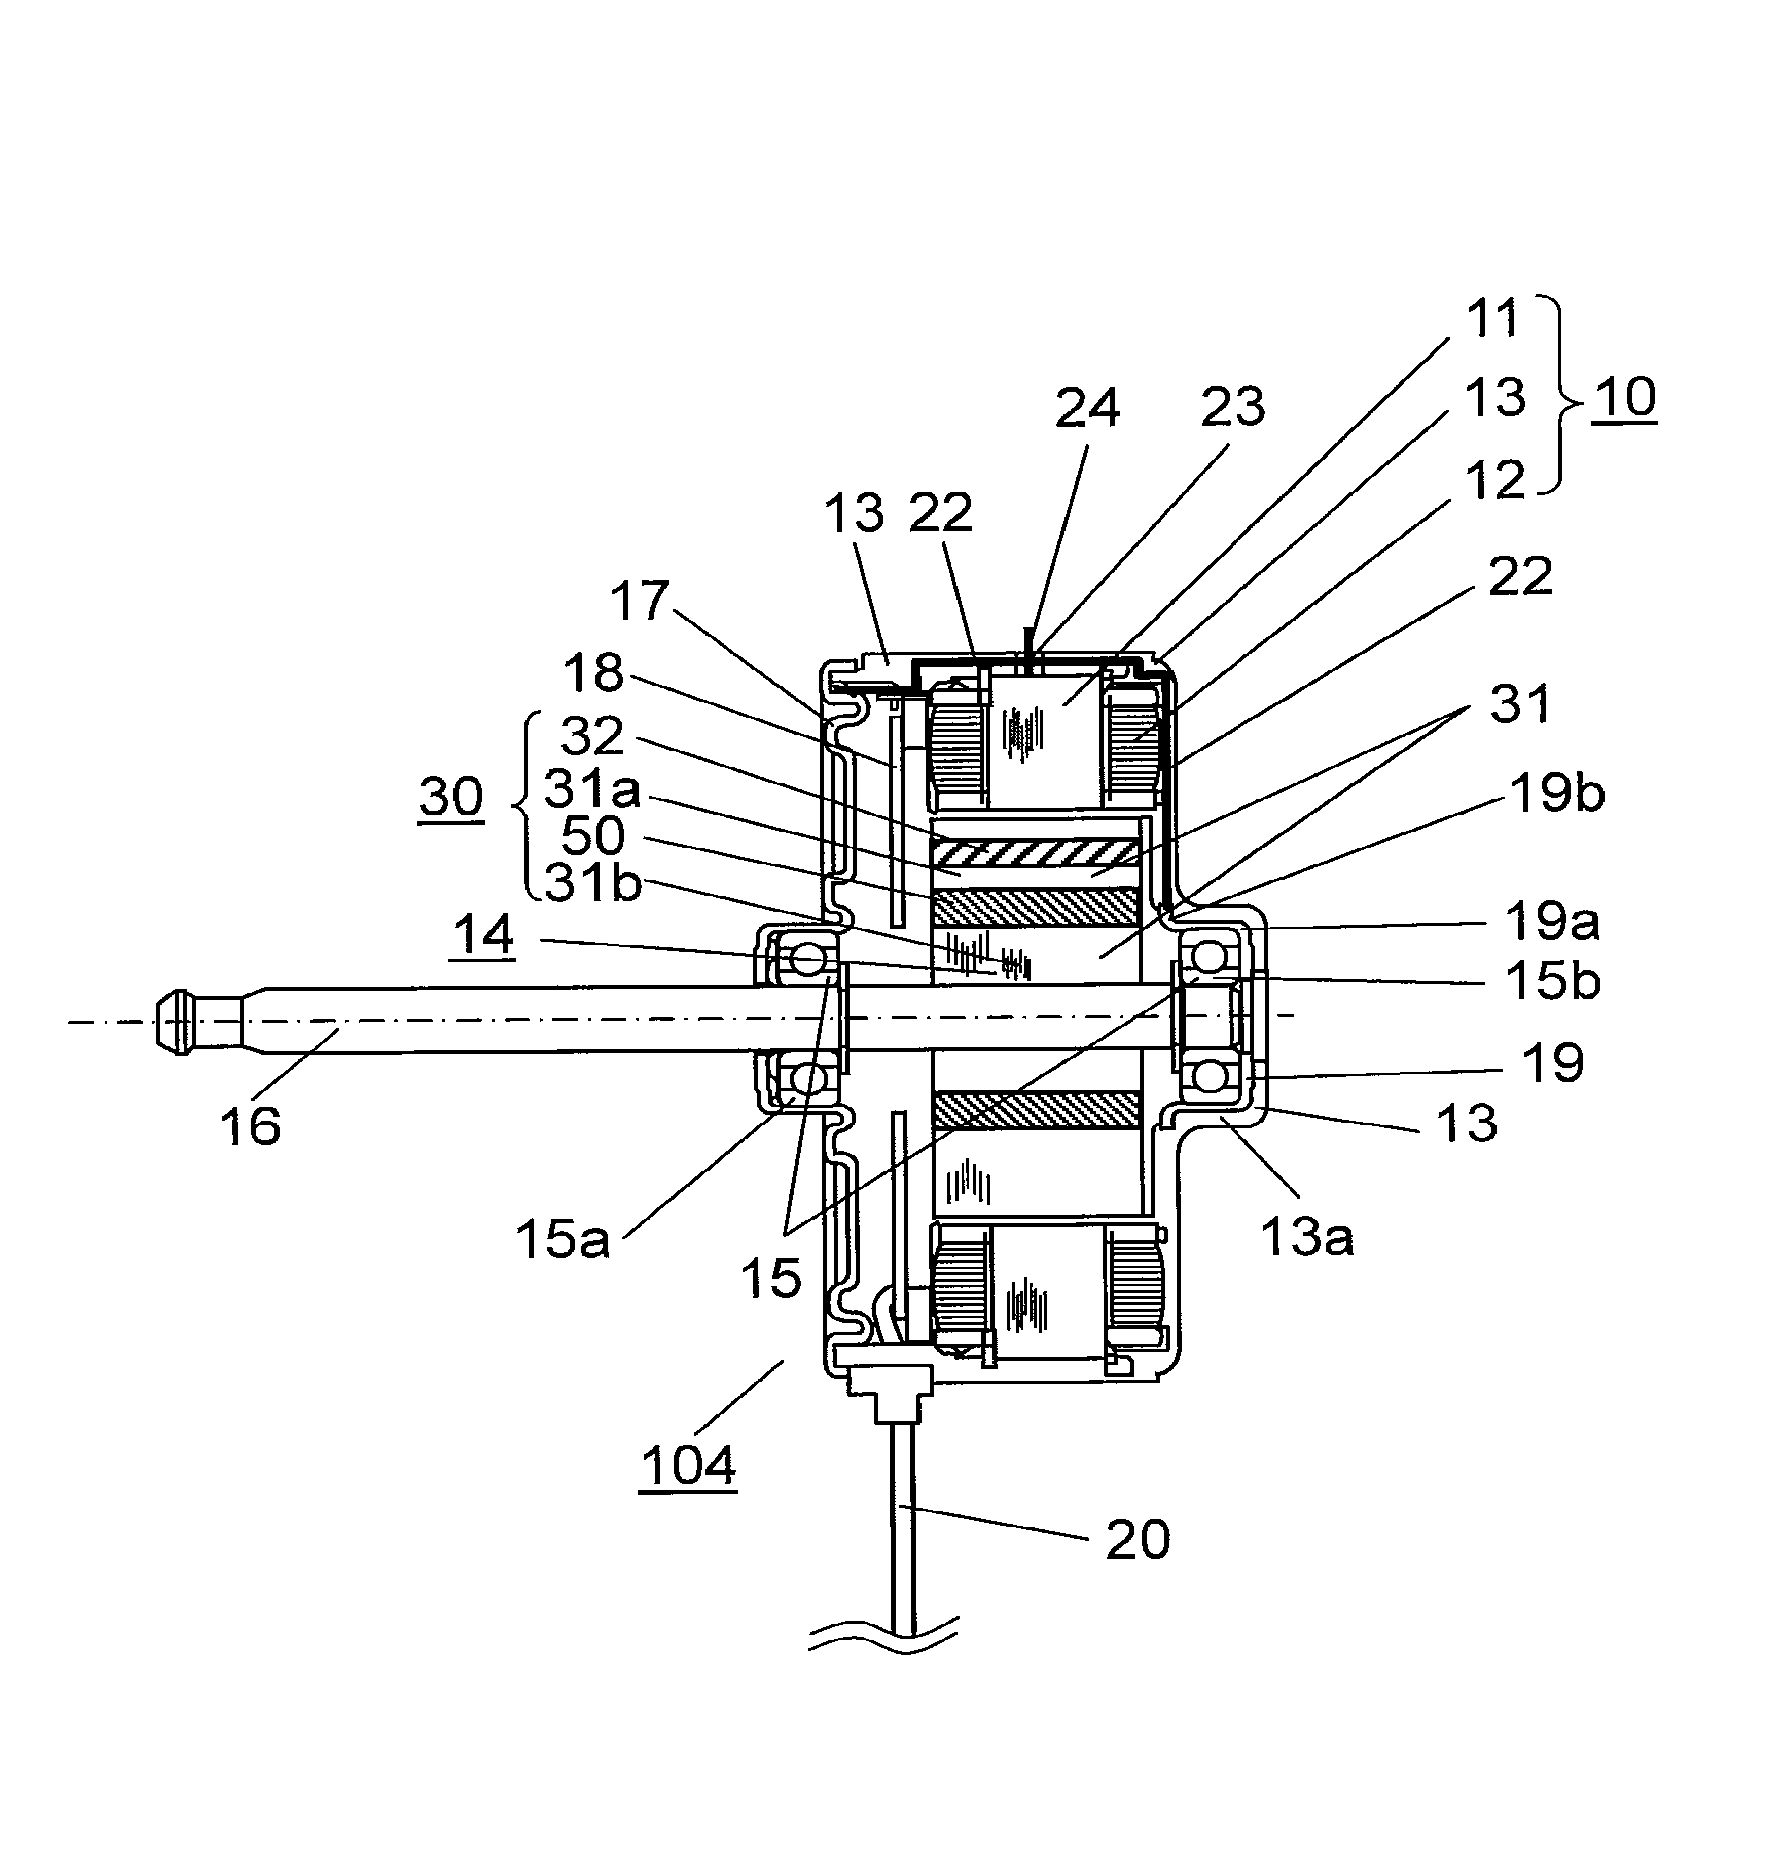 Motor and electrical appliance provided with same